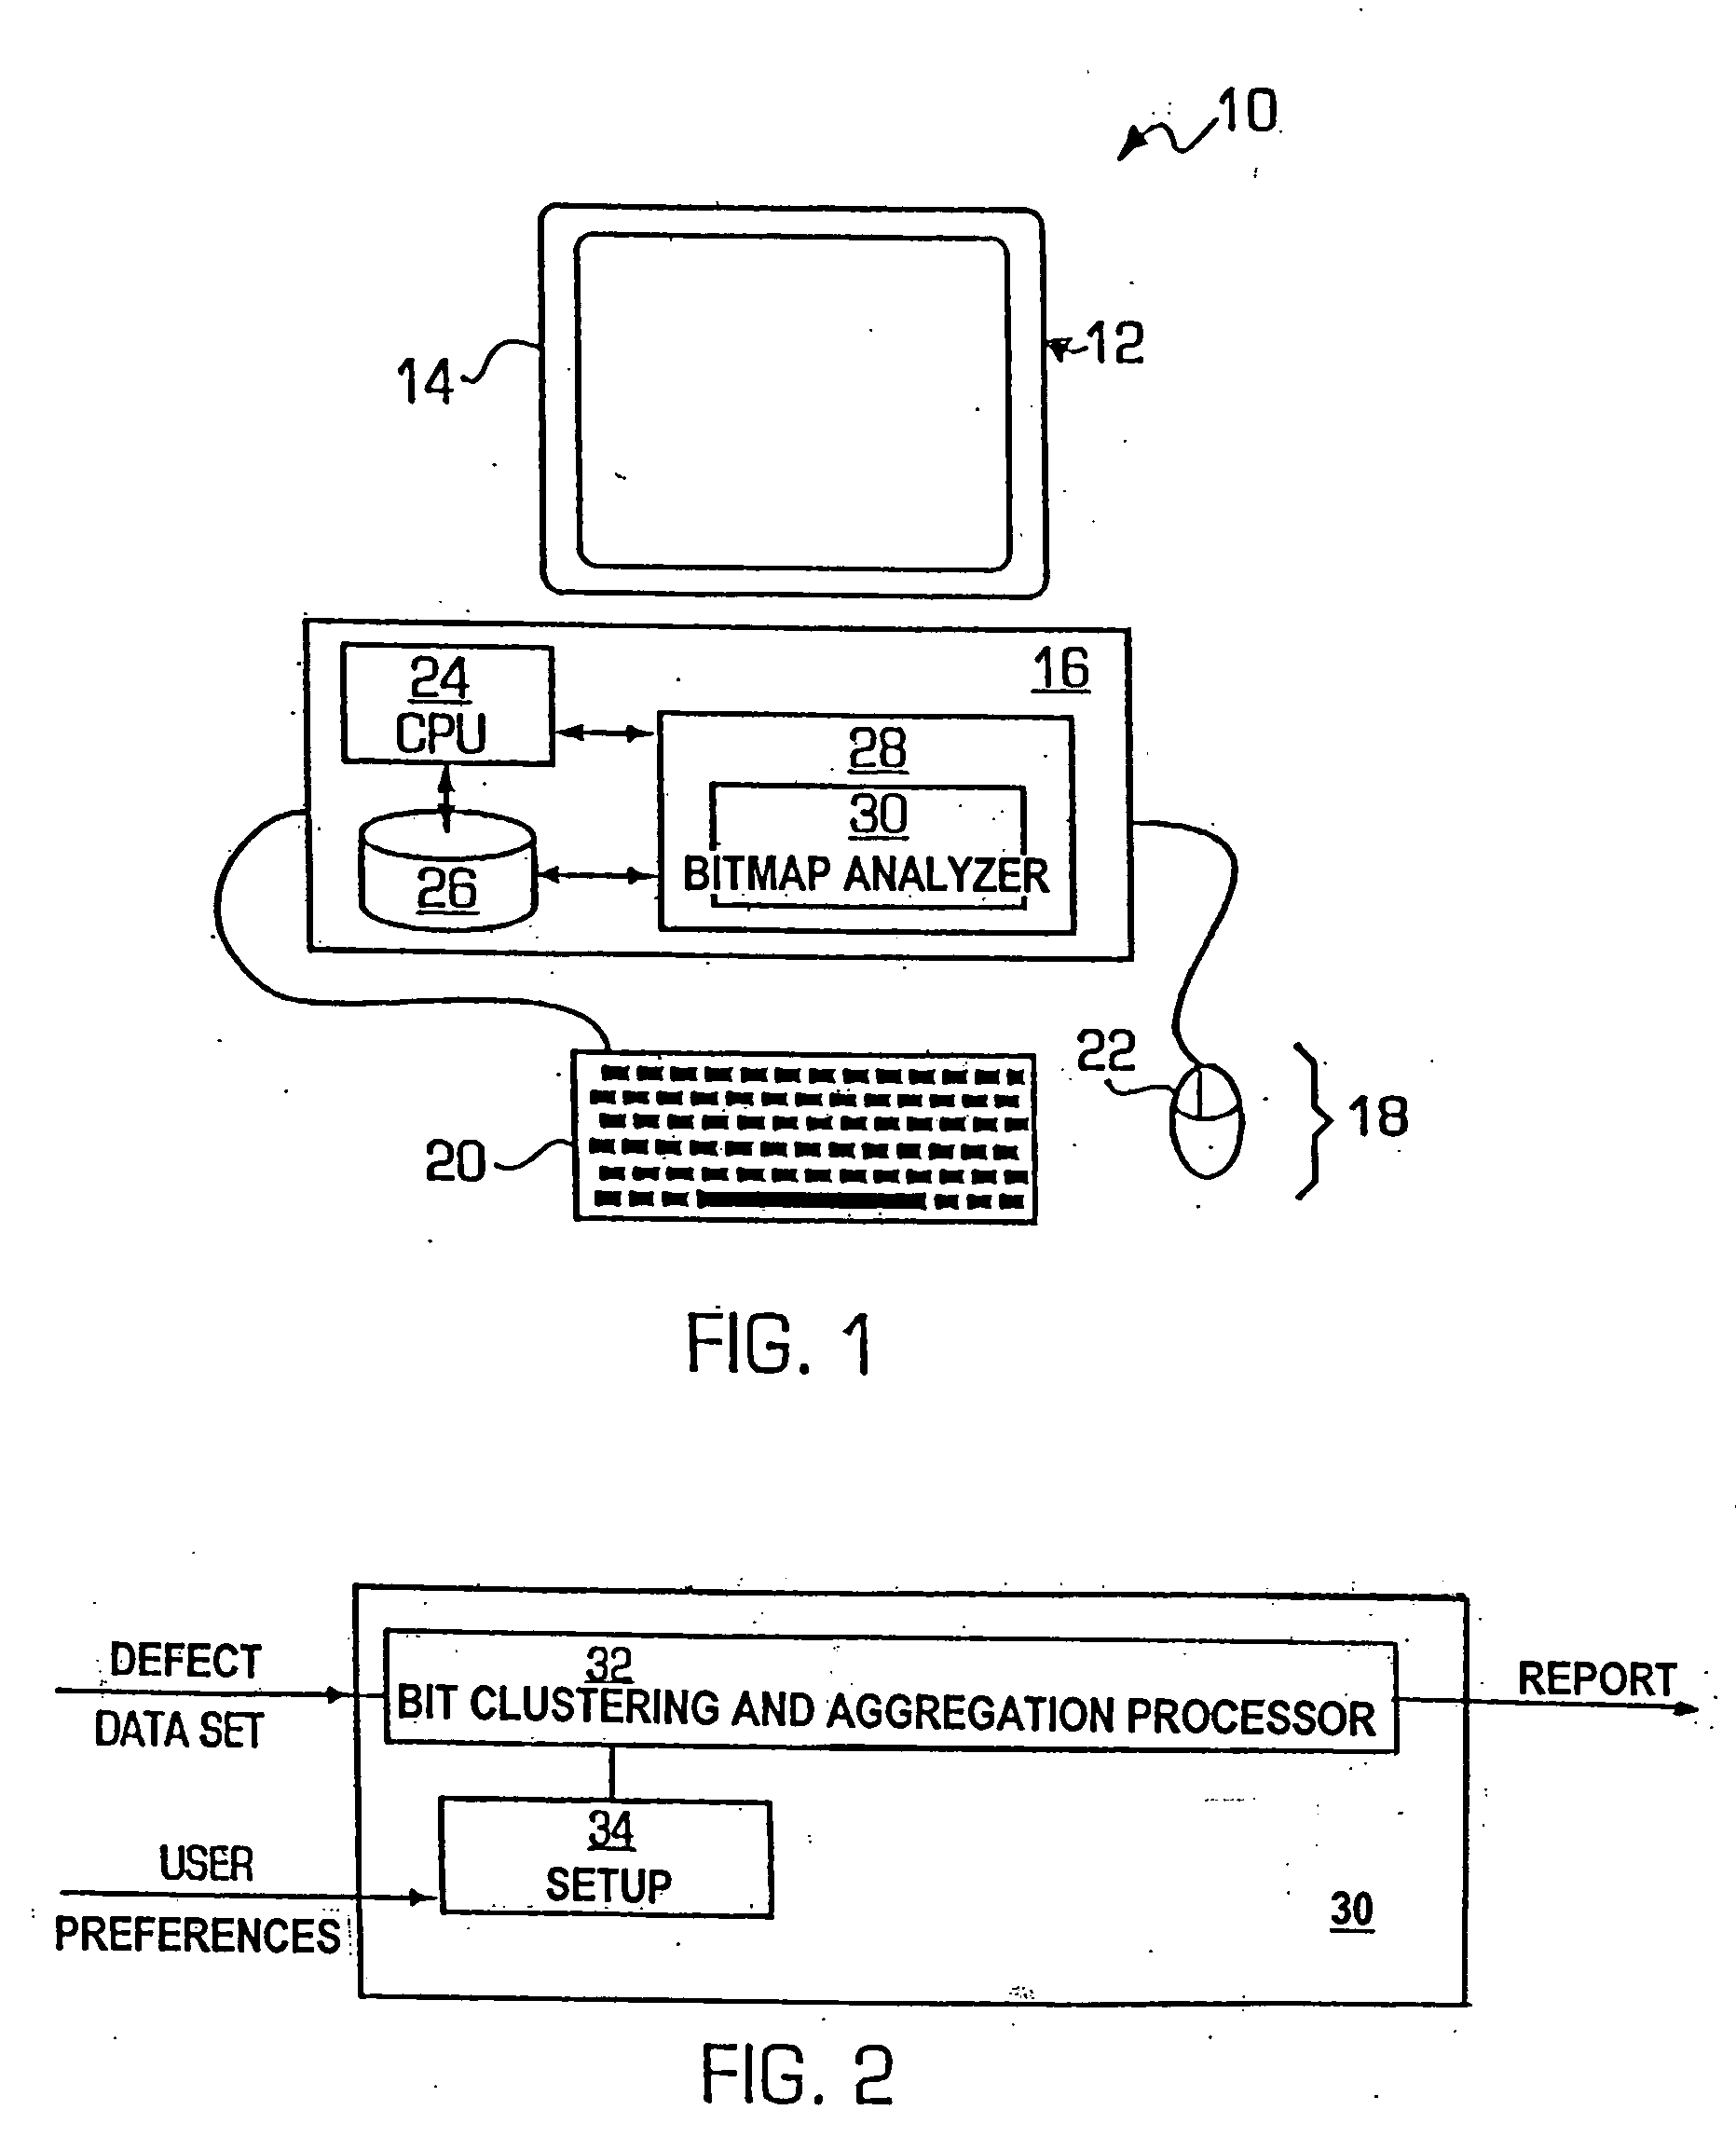 Bitmap cluster analysis of defects in integrated circuits